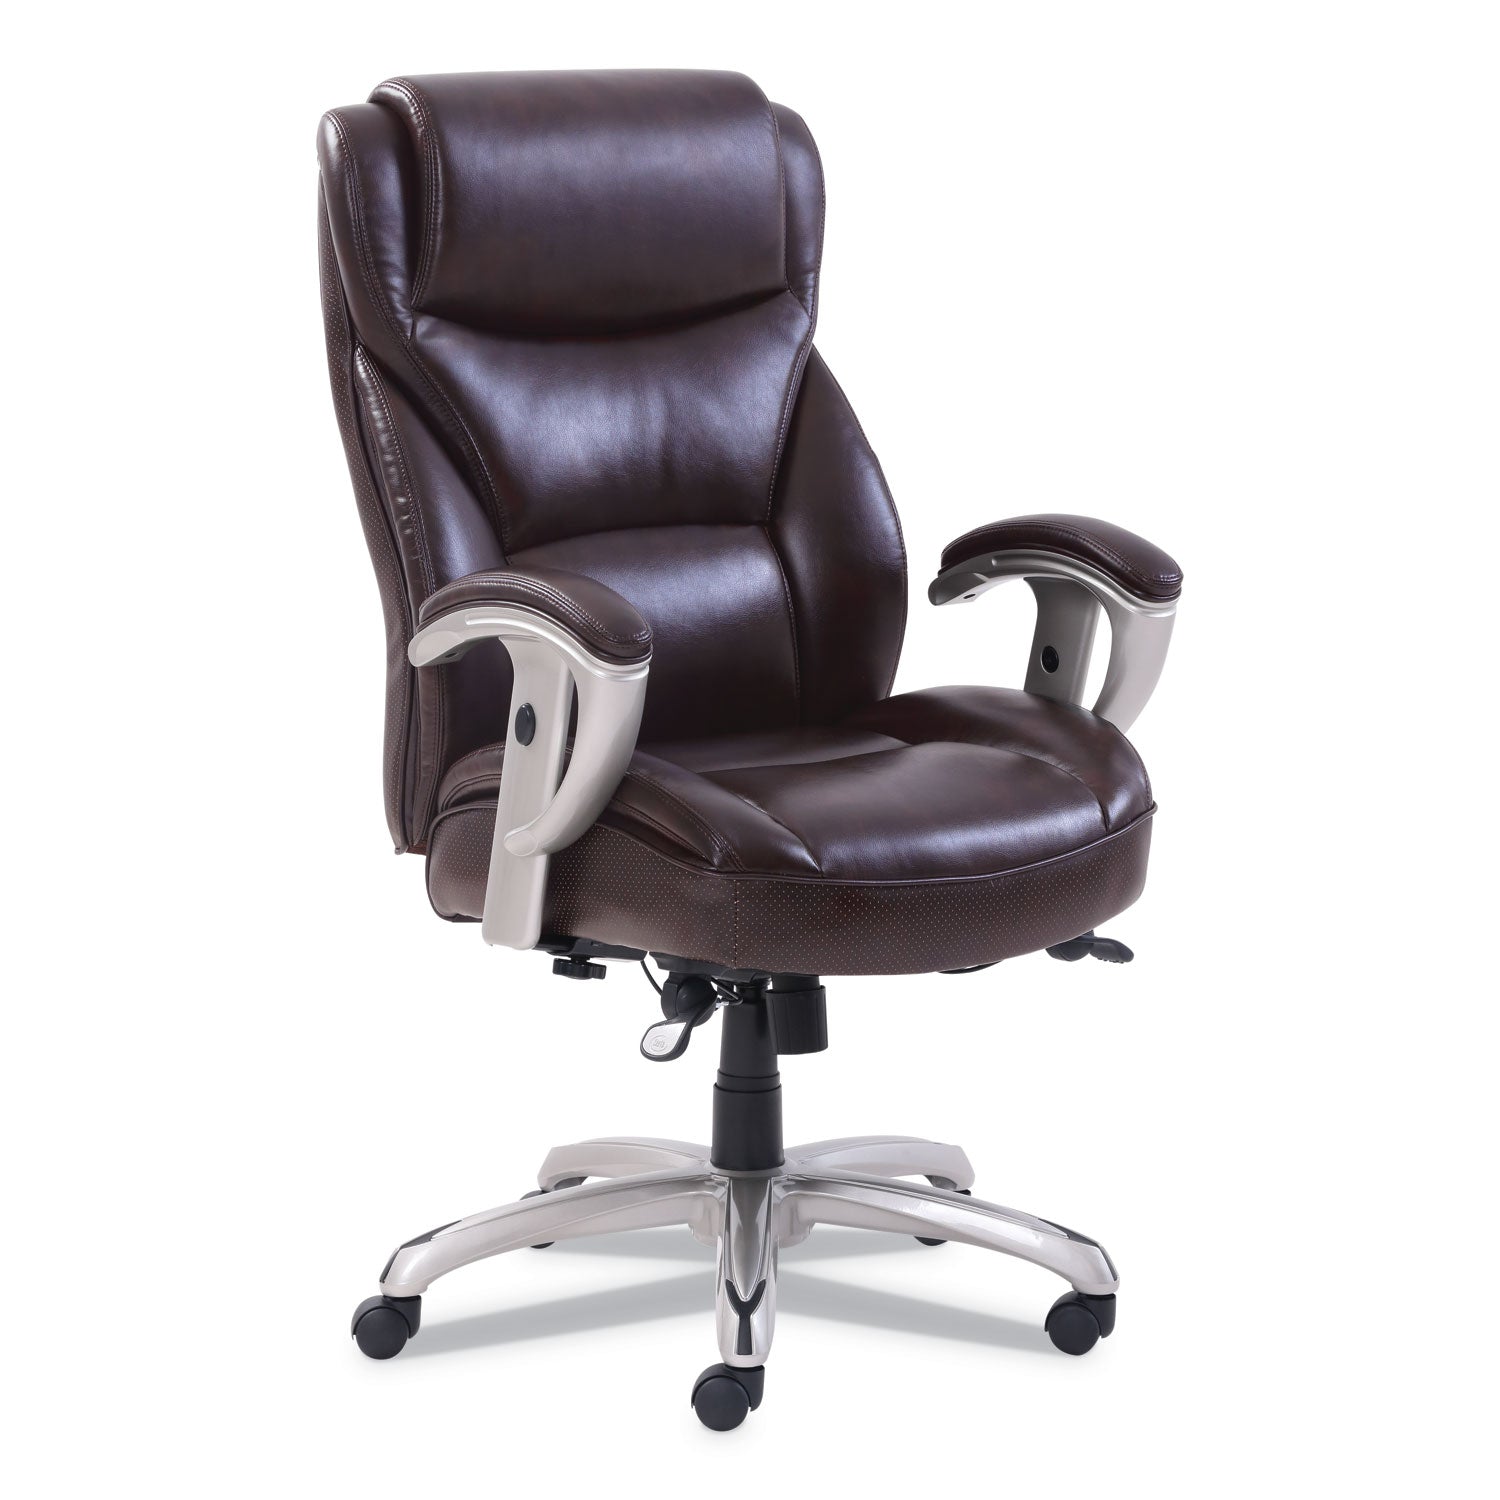 emerson-big-and-tall-task-chair-supports-up-to-400-lb-195-to-225-seat-height-brown-seat-back-silver-base_srj49416brw - 1